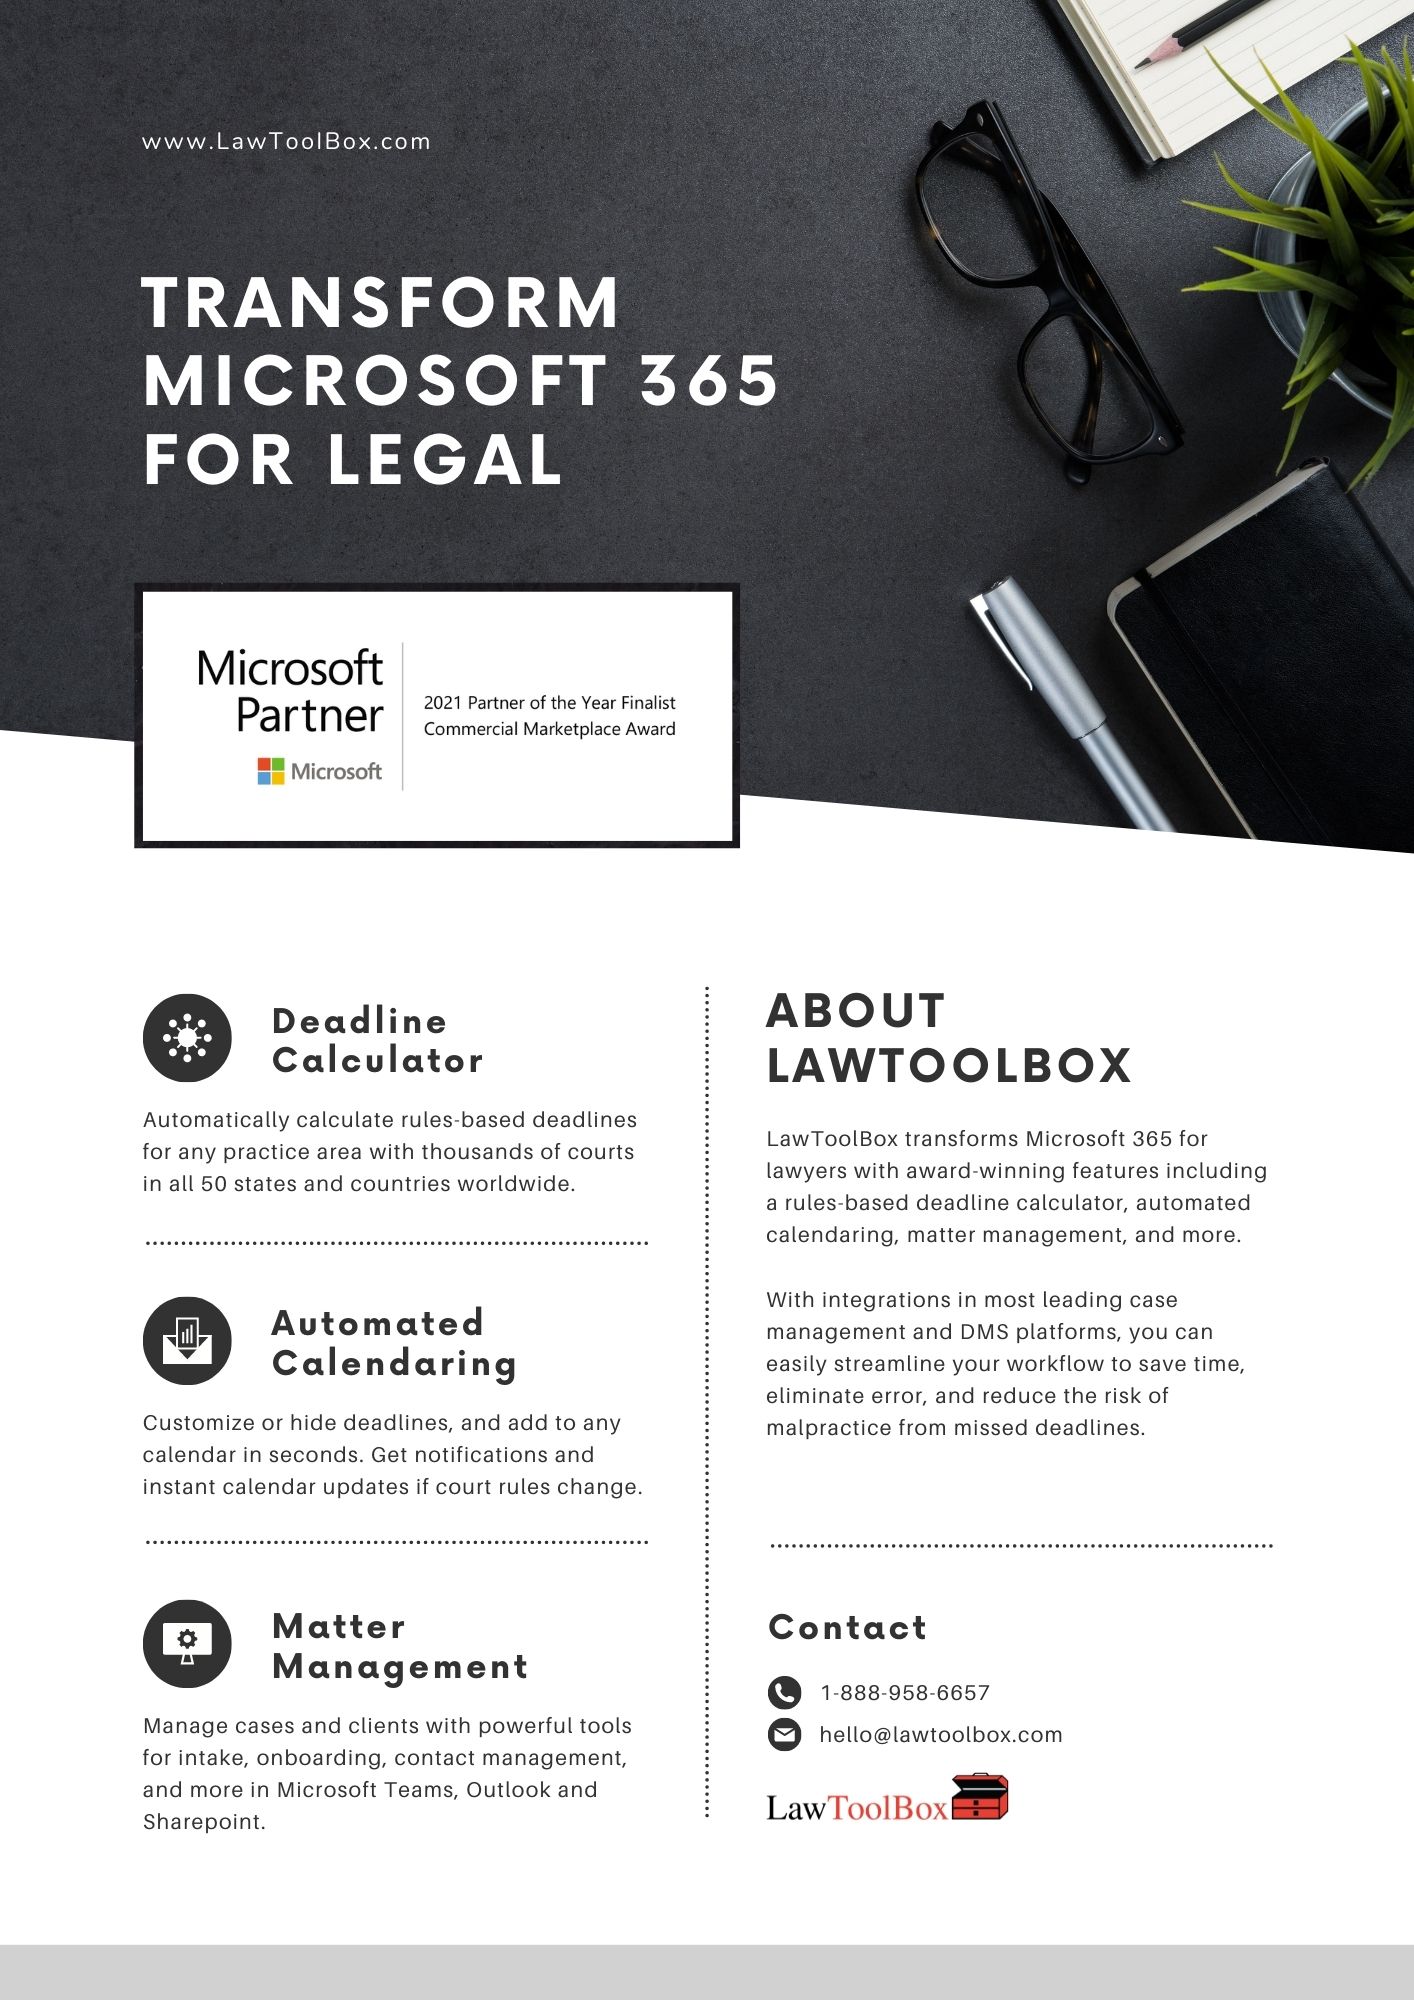 LawToolBox transforms Microsoft 365 for law firms, corporate legal departments, governments, and agencies around the world.